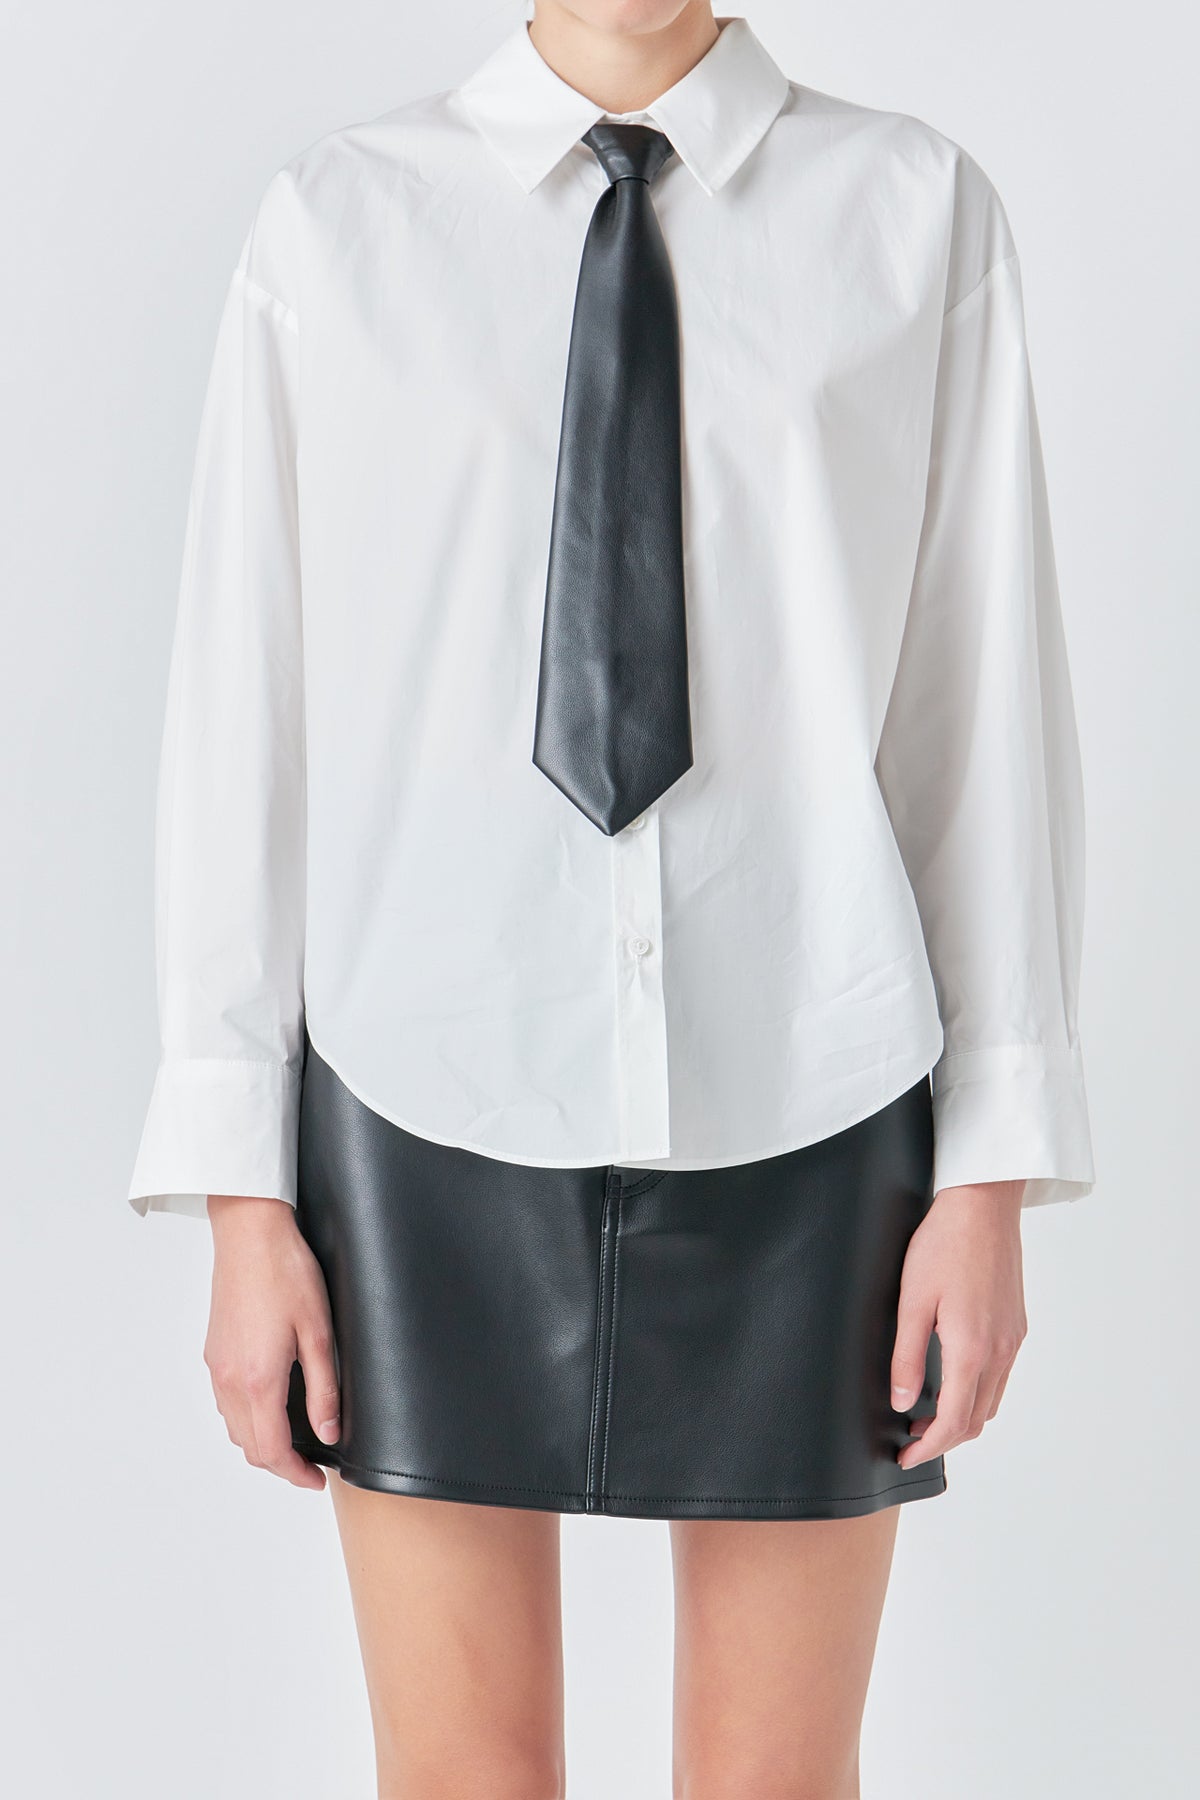 GREY LAB - Shirt with Faux Leather Necktie - TOPS available at Objectrare